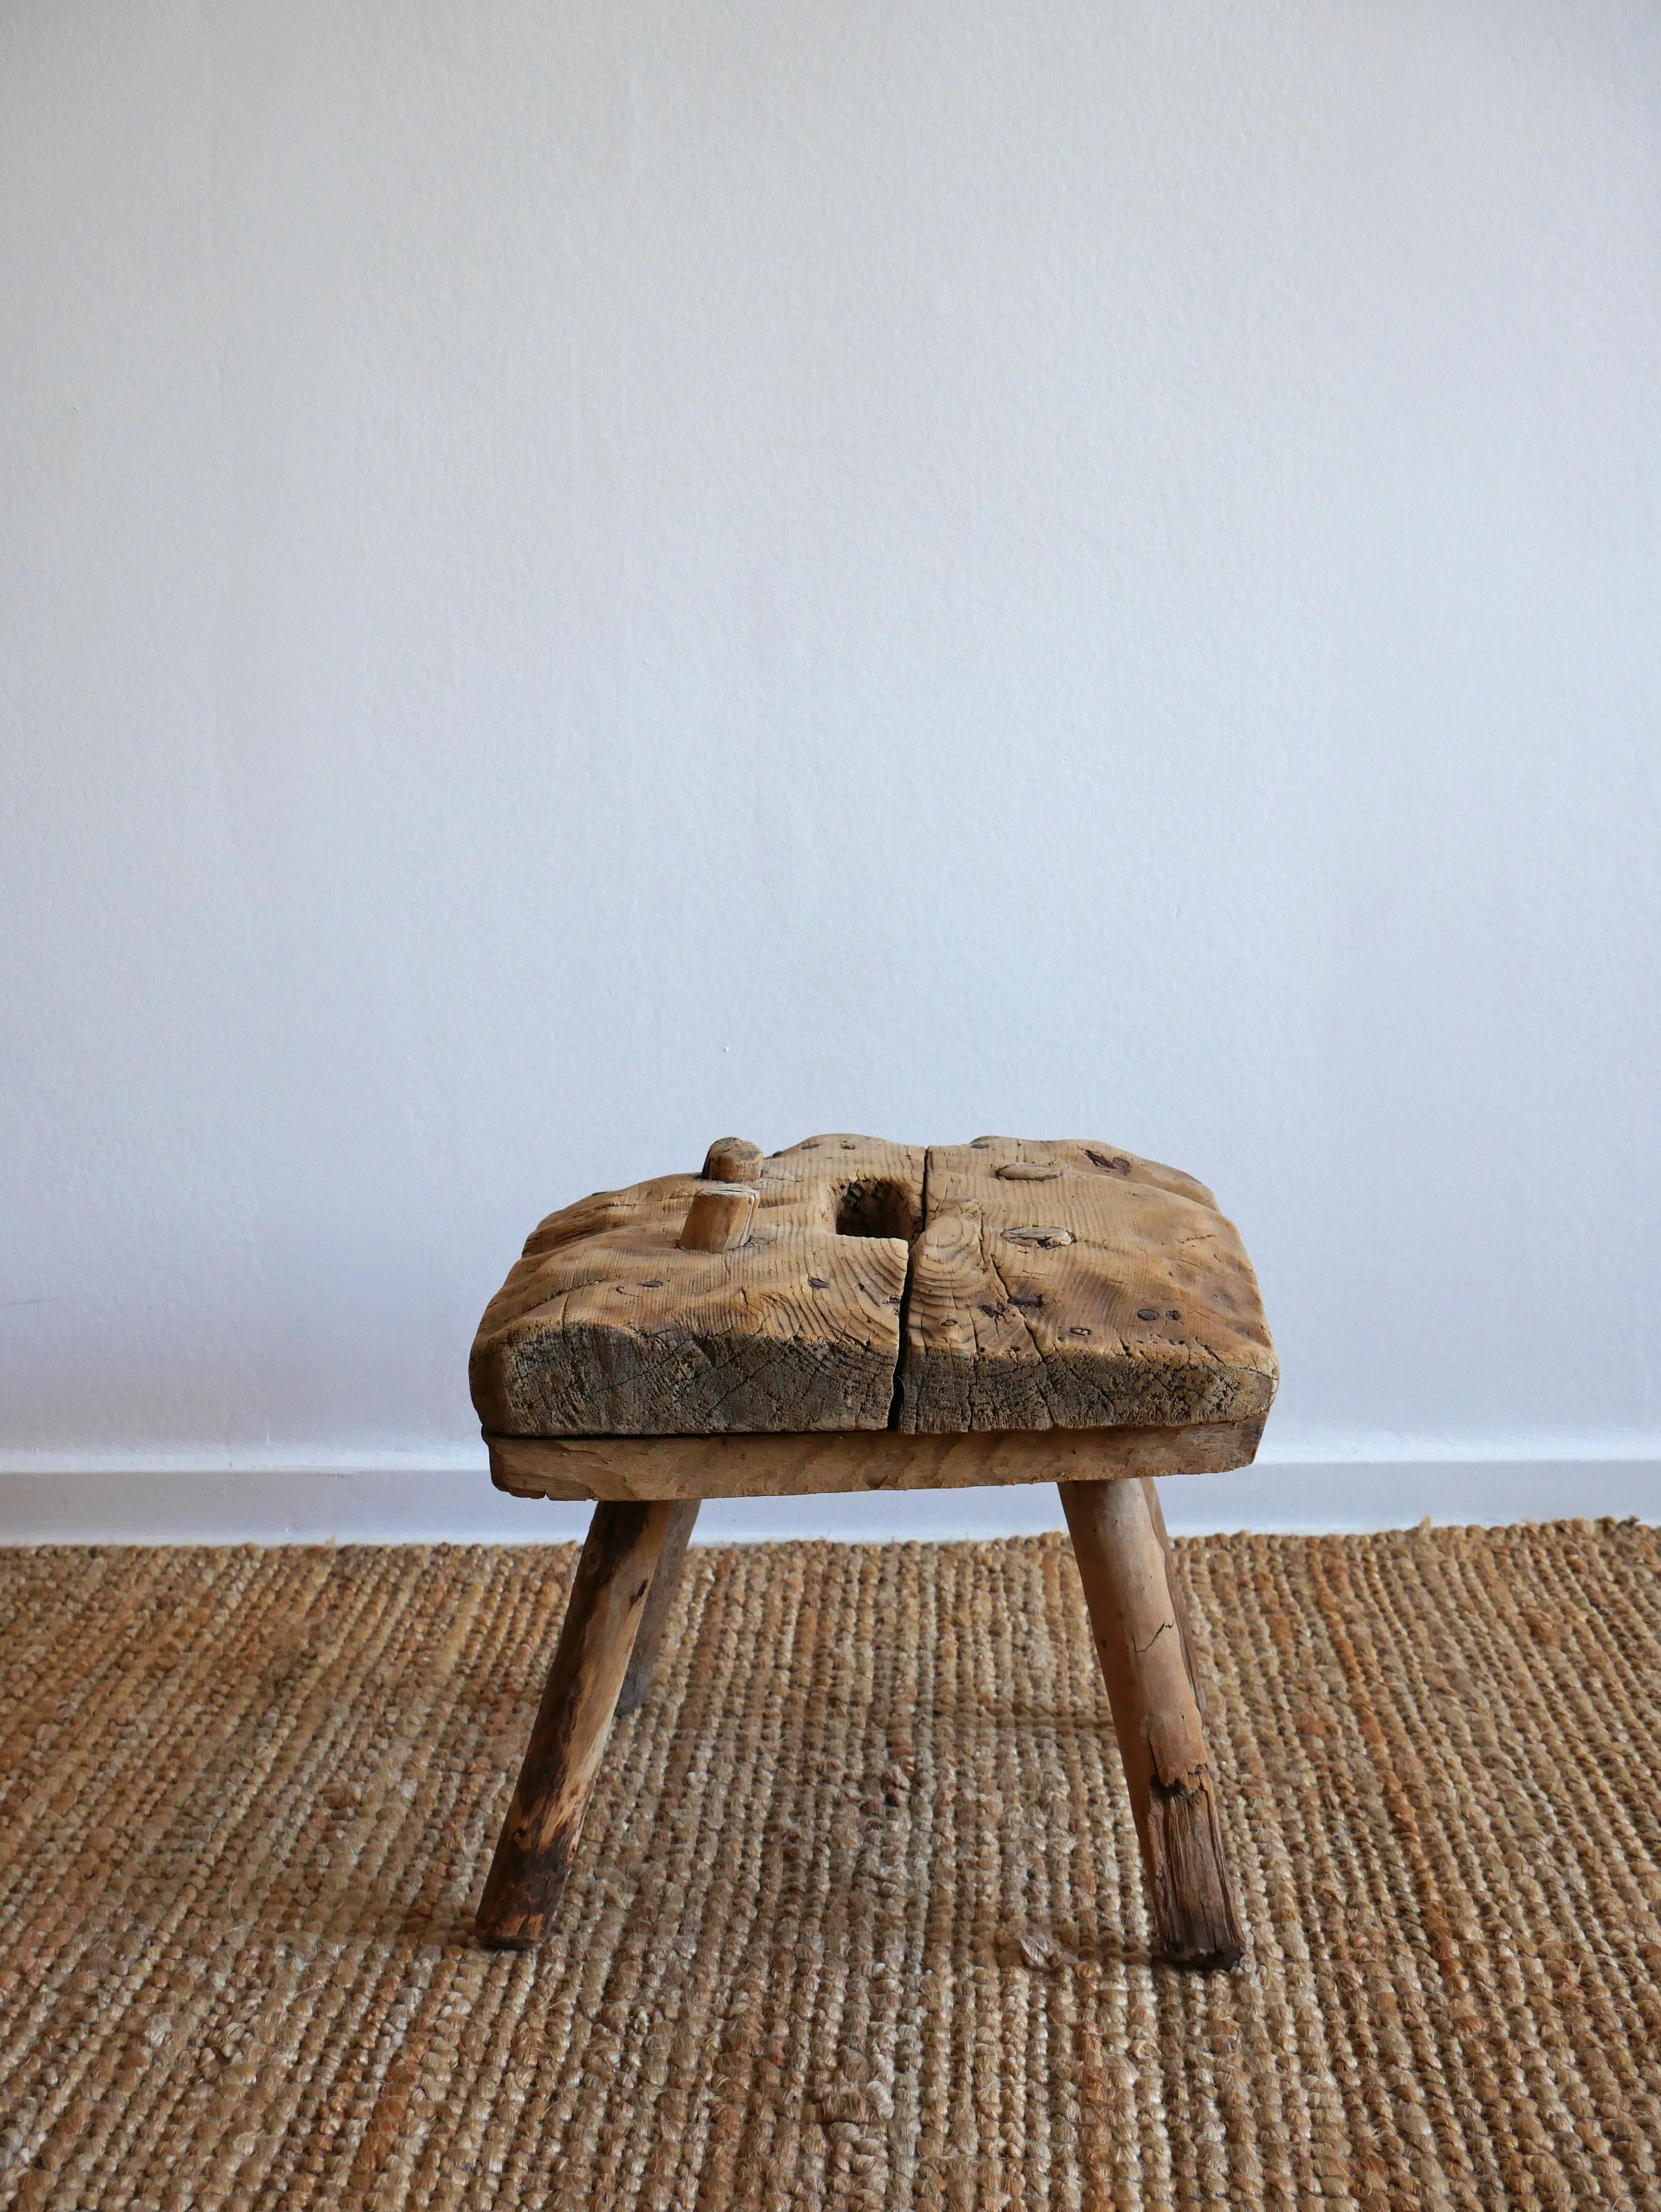 Hand-Crafted Old Swedish Milking Stool Dated 1819